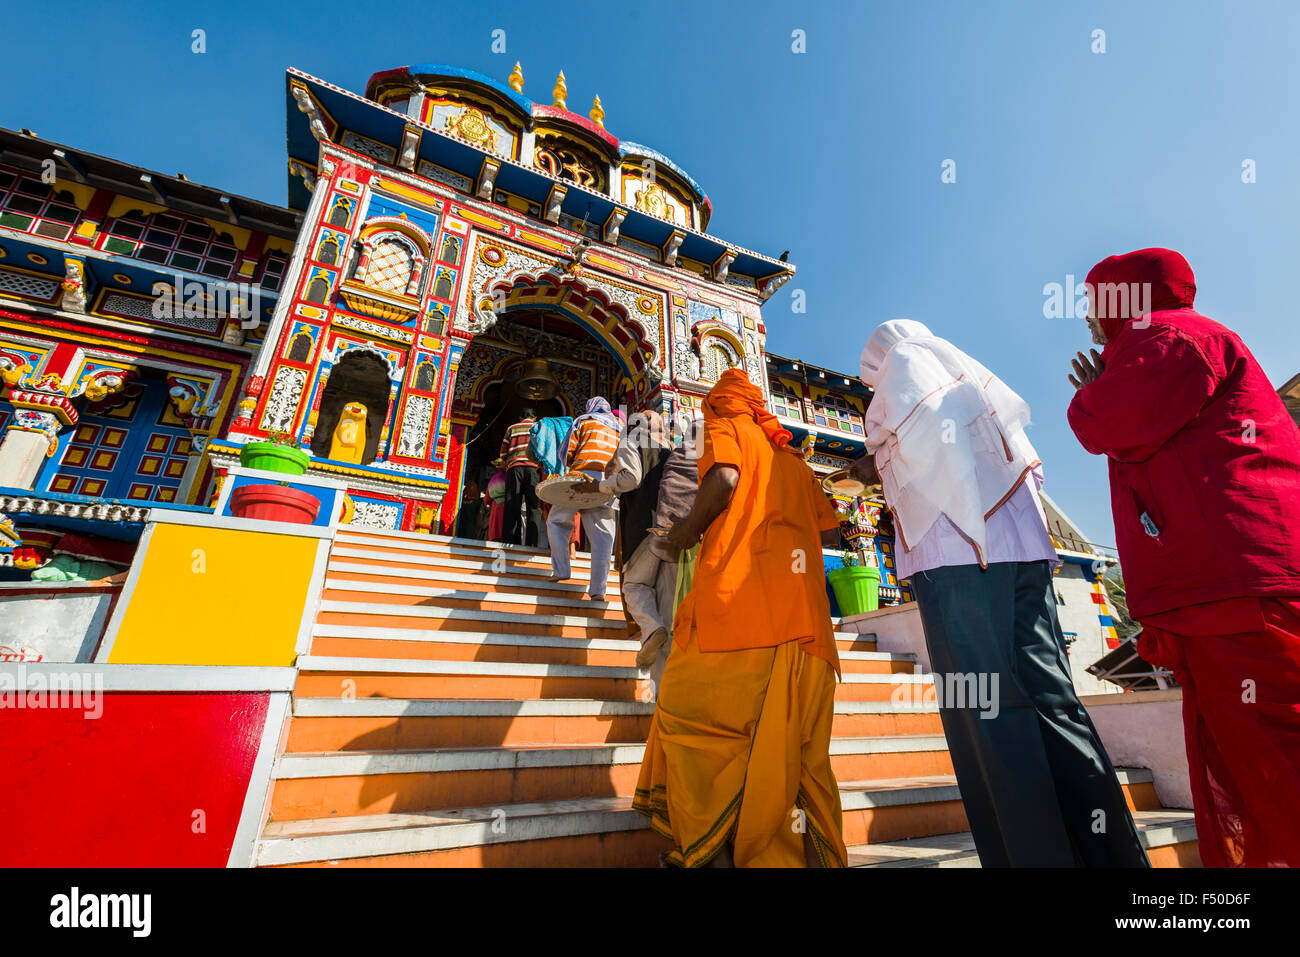 Many pilgrims are gathering in front of the colorful Badrinath Temple, one of the Dschar Dham destinations Stock Photo